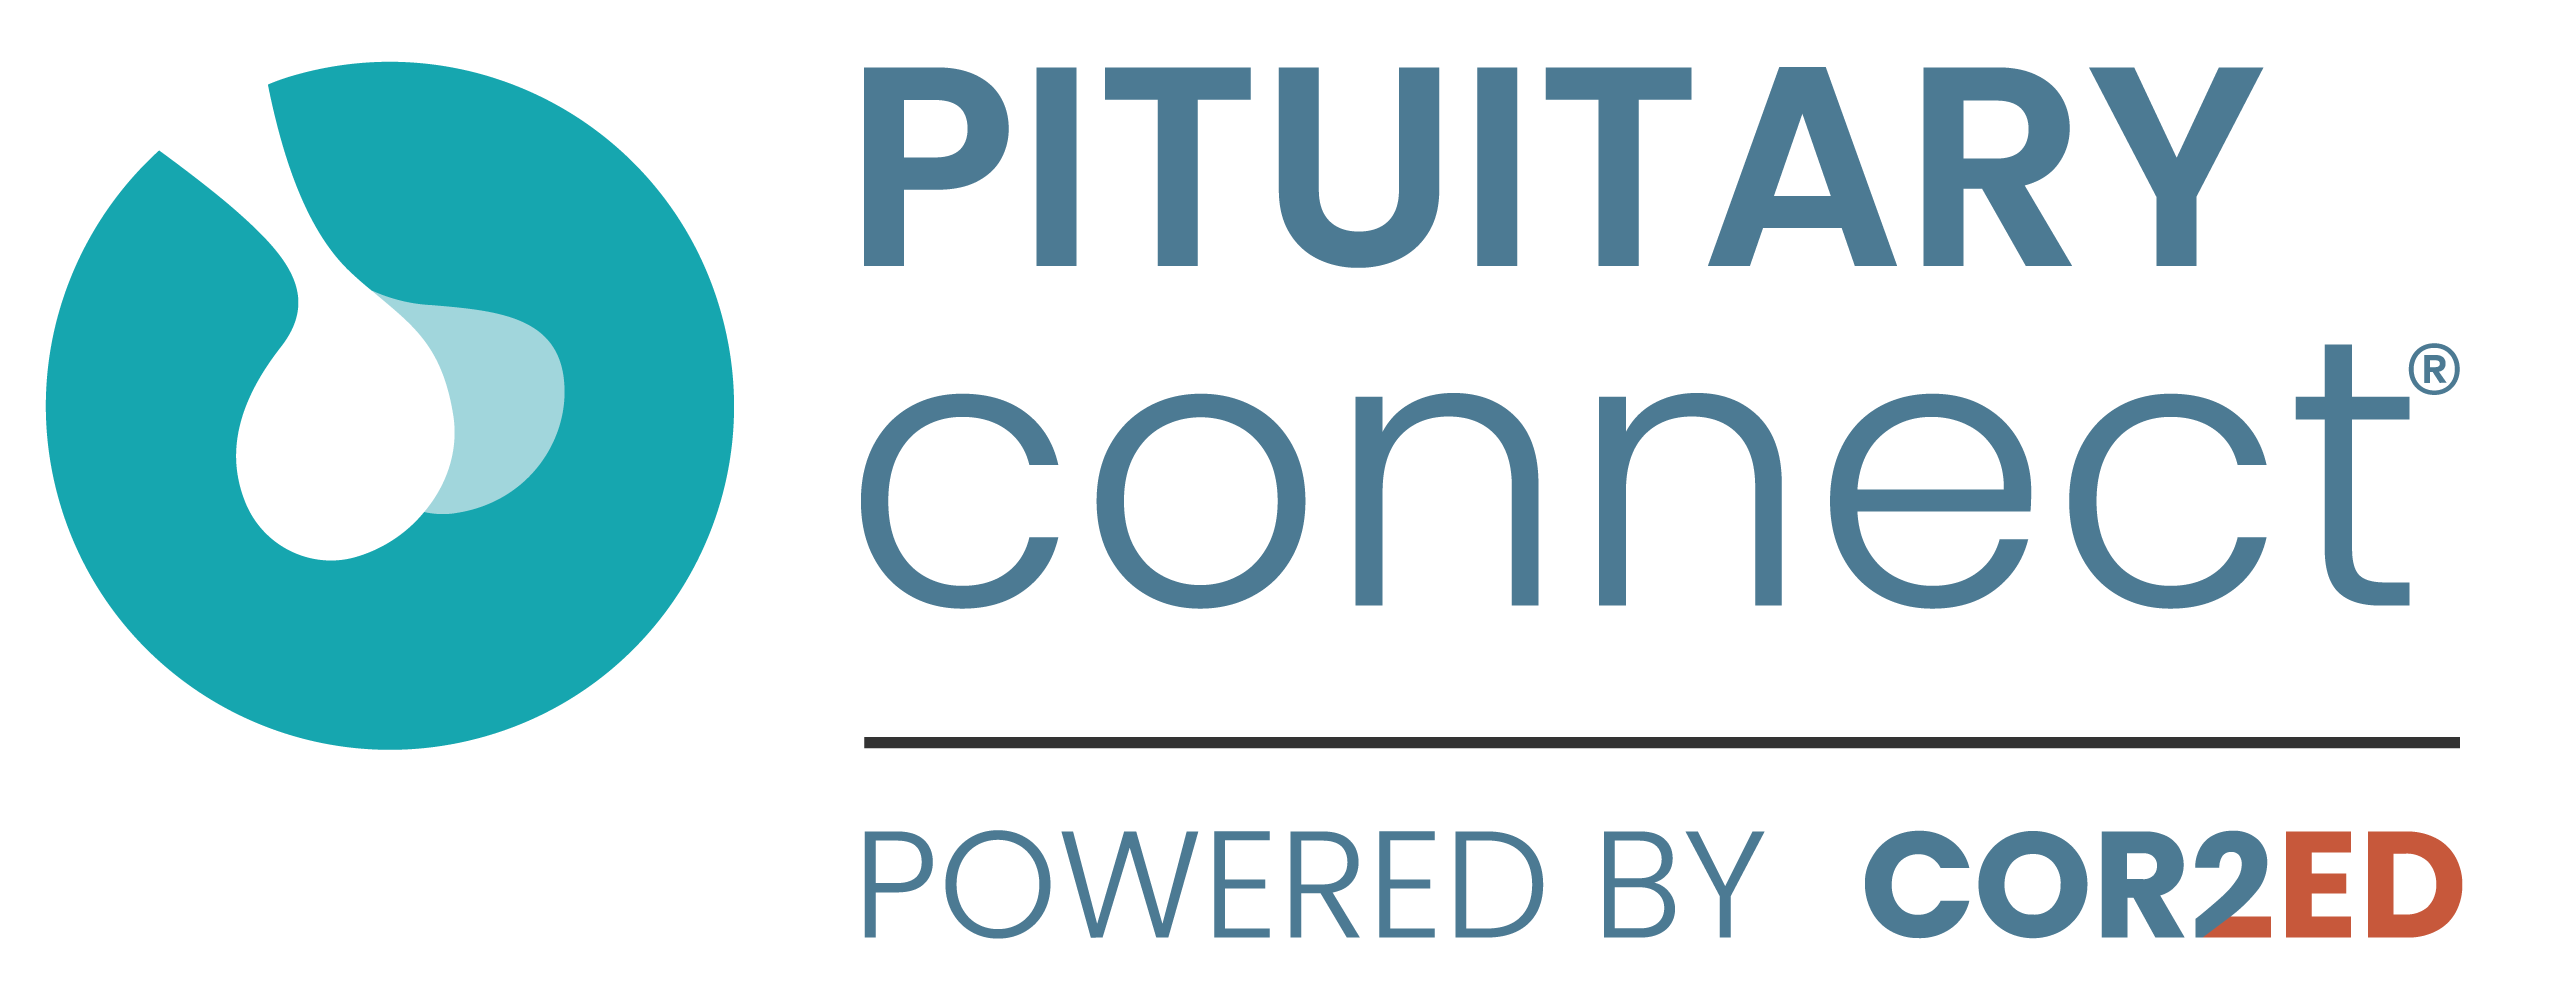 PITUITARY CONNECT